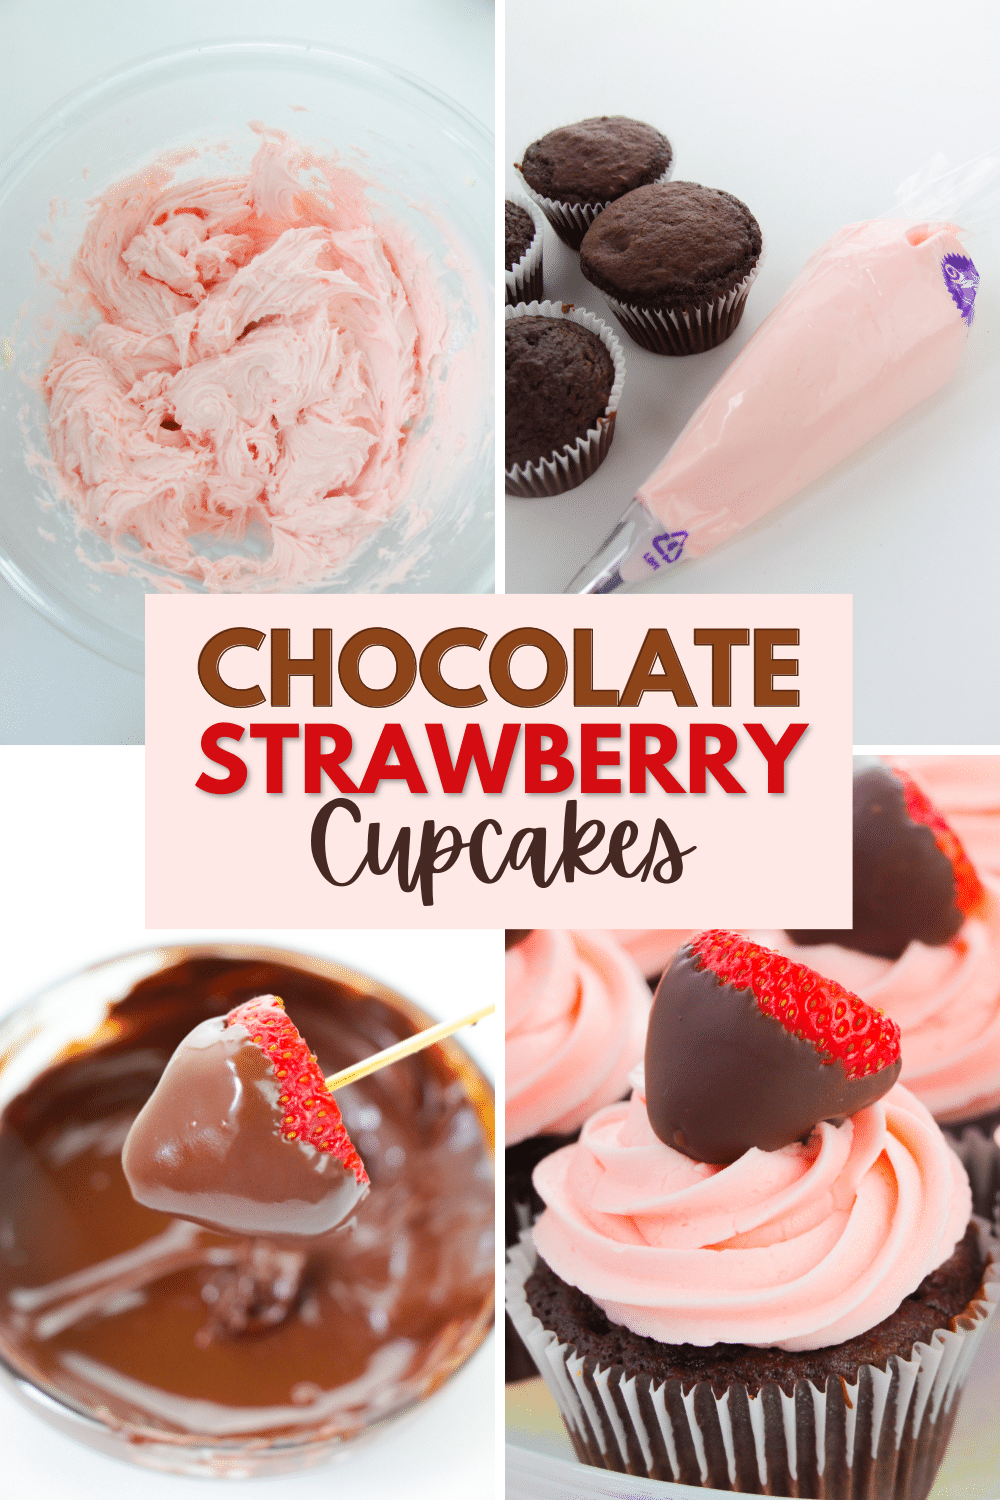 These Chocolate Strawberry Cupcakes are delicious treats topped with strawberry buttercream frosting and a chocolate covered strawberry. #chocolatestrawberrycupcakes #chocolatecoveredstrawberry #strawberrybuttercreamfrosting #chocolatecupcakes #valentinesday via @wondermomwannab